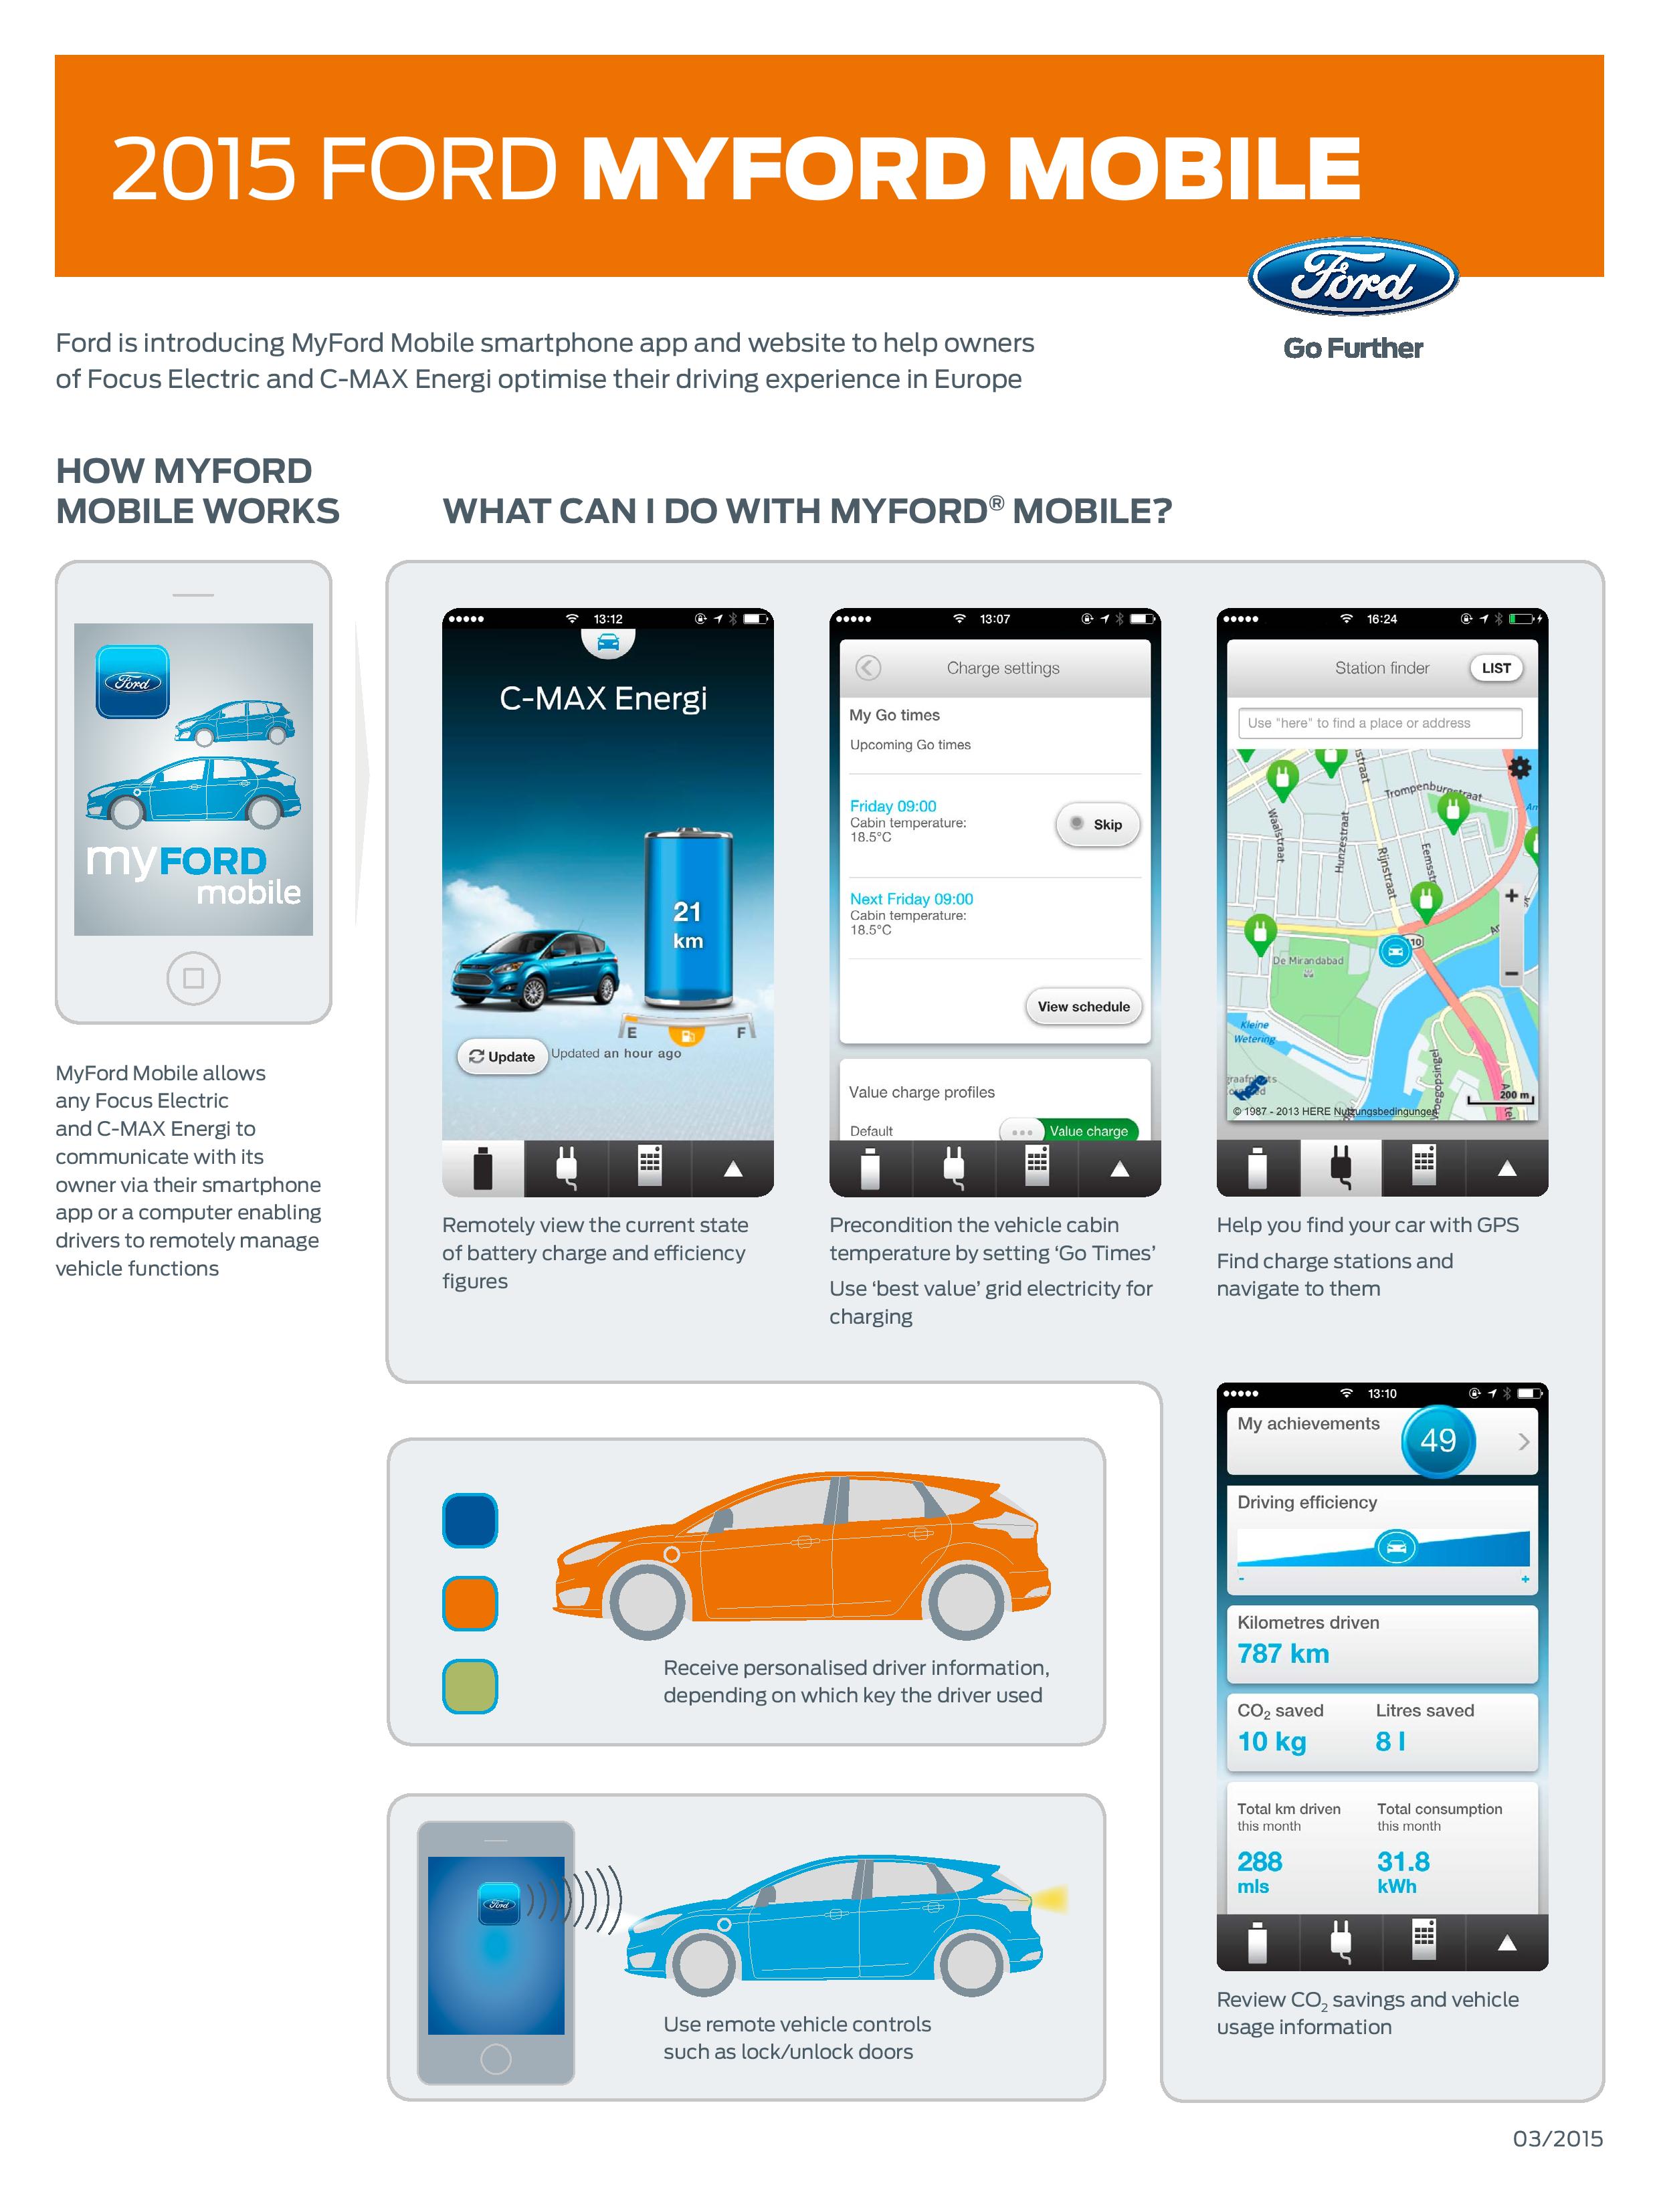 Allow mobile. Ford Smart Mobility LLC.